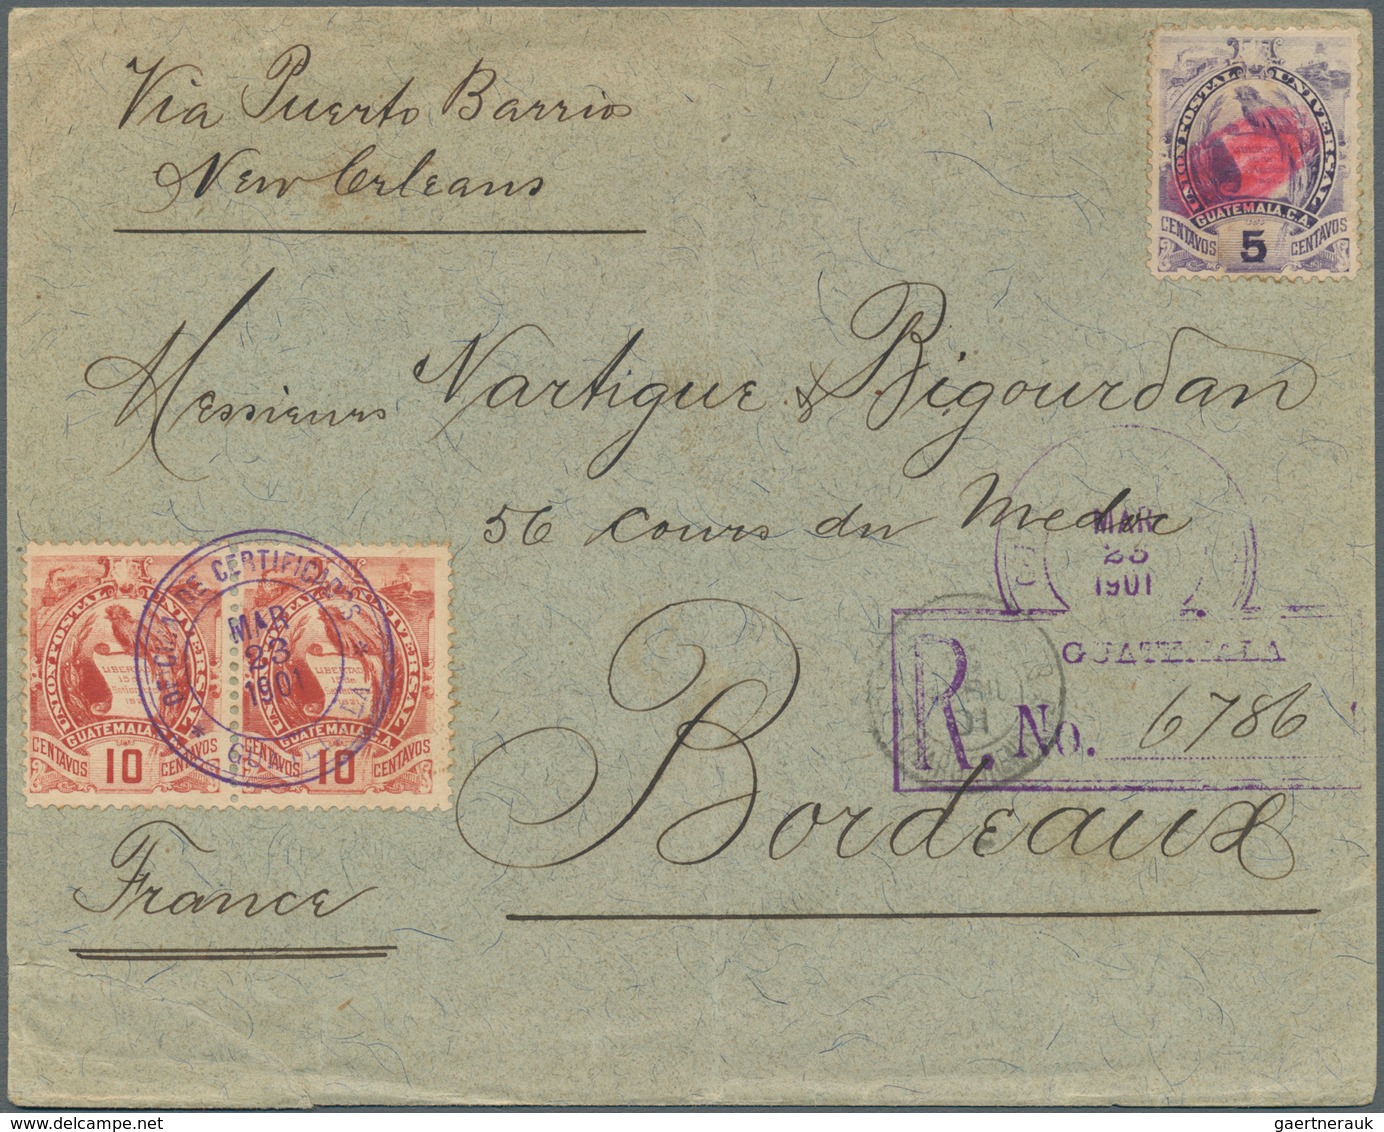 24585 Übersee: 1893/1994: 40 better covers and postal stationeries including postage dues, censored mail o